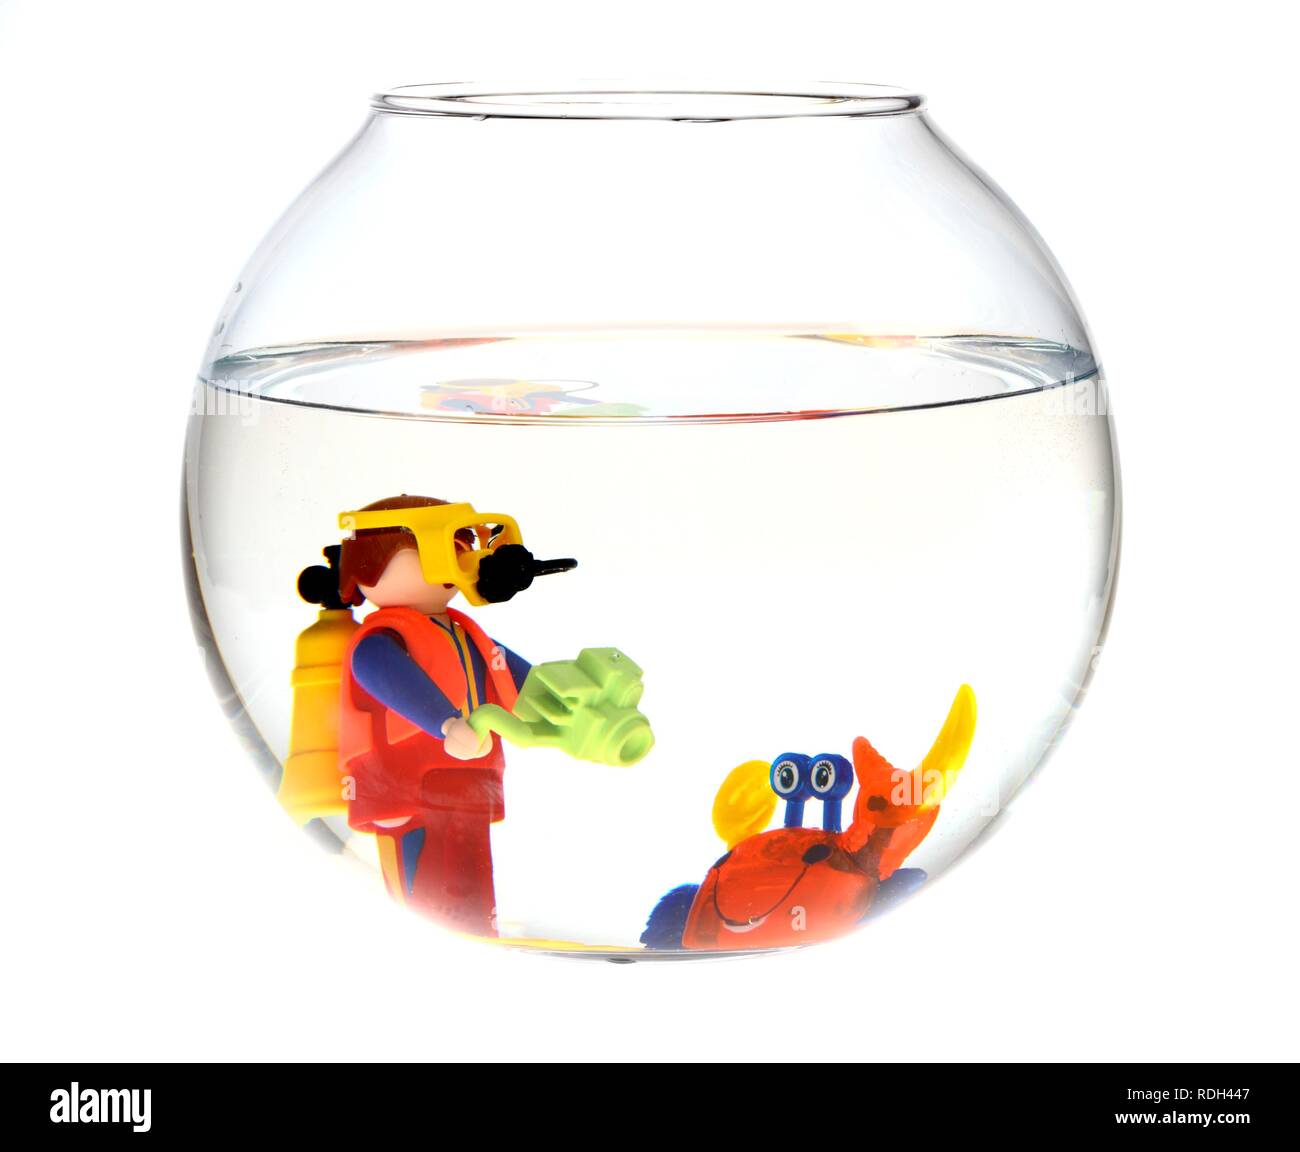 Toy scuba diver with an underwater camera and a crab in a fish bowl, illustration Stock Photo